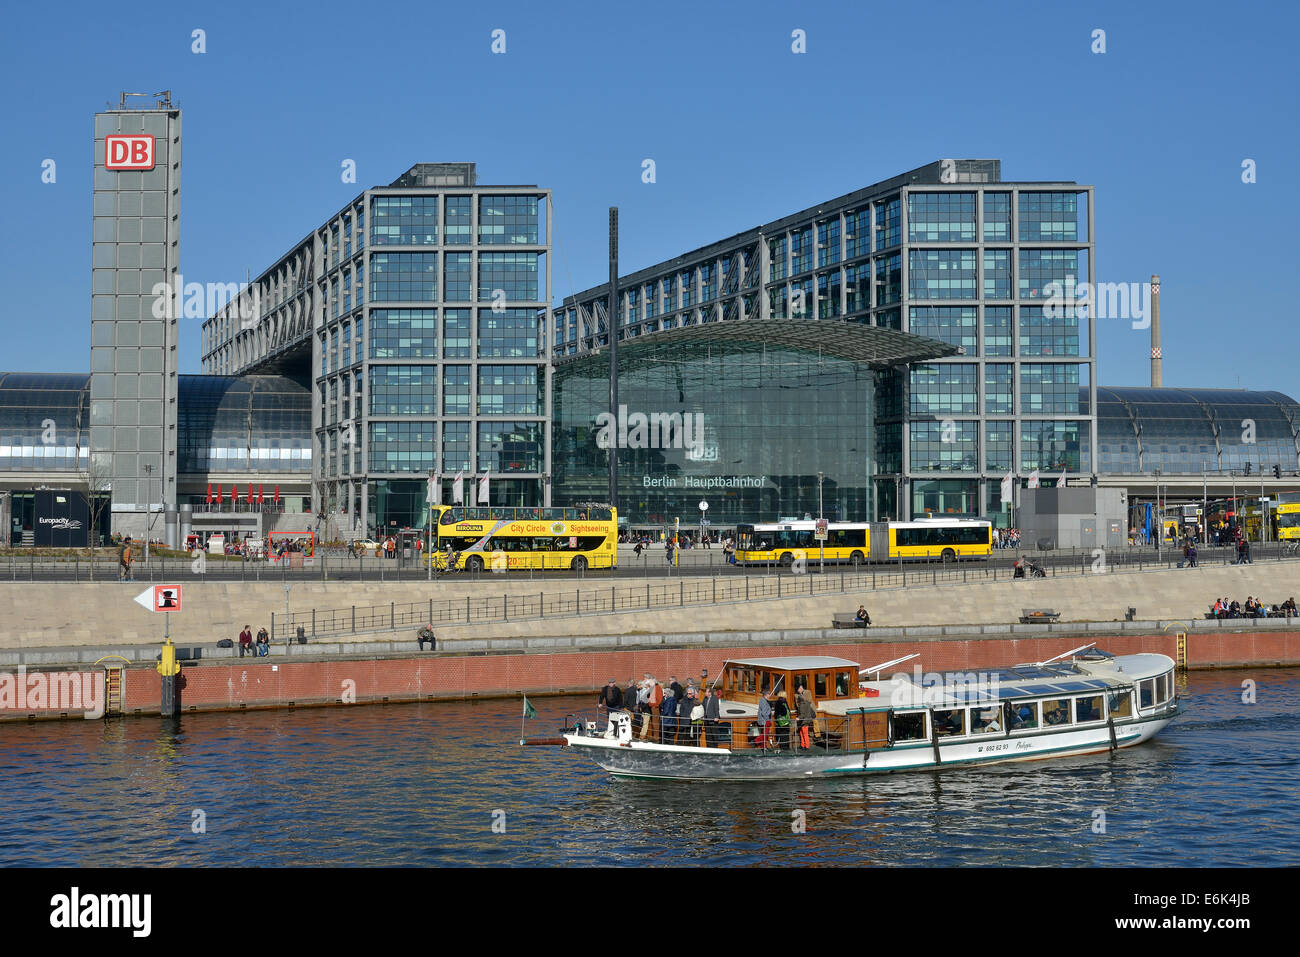 Excursion boat on the Spree River in front of Berlin Hauptbahnhof main railway station, Berlin, Germany Stock Photo